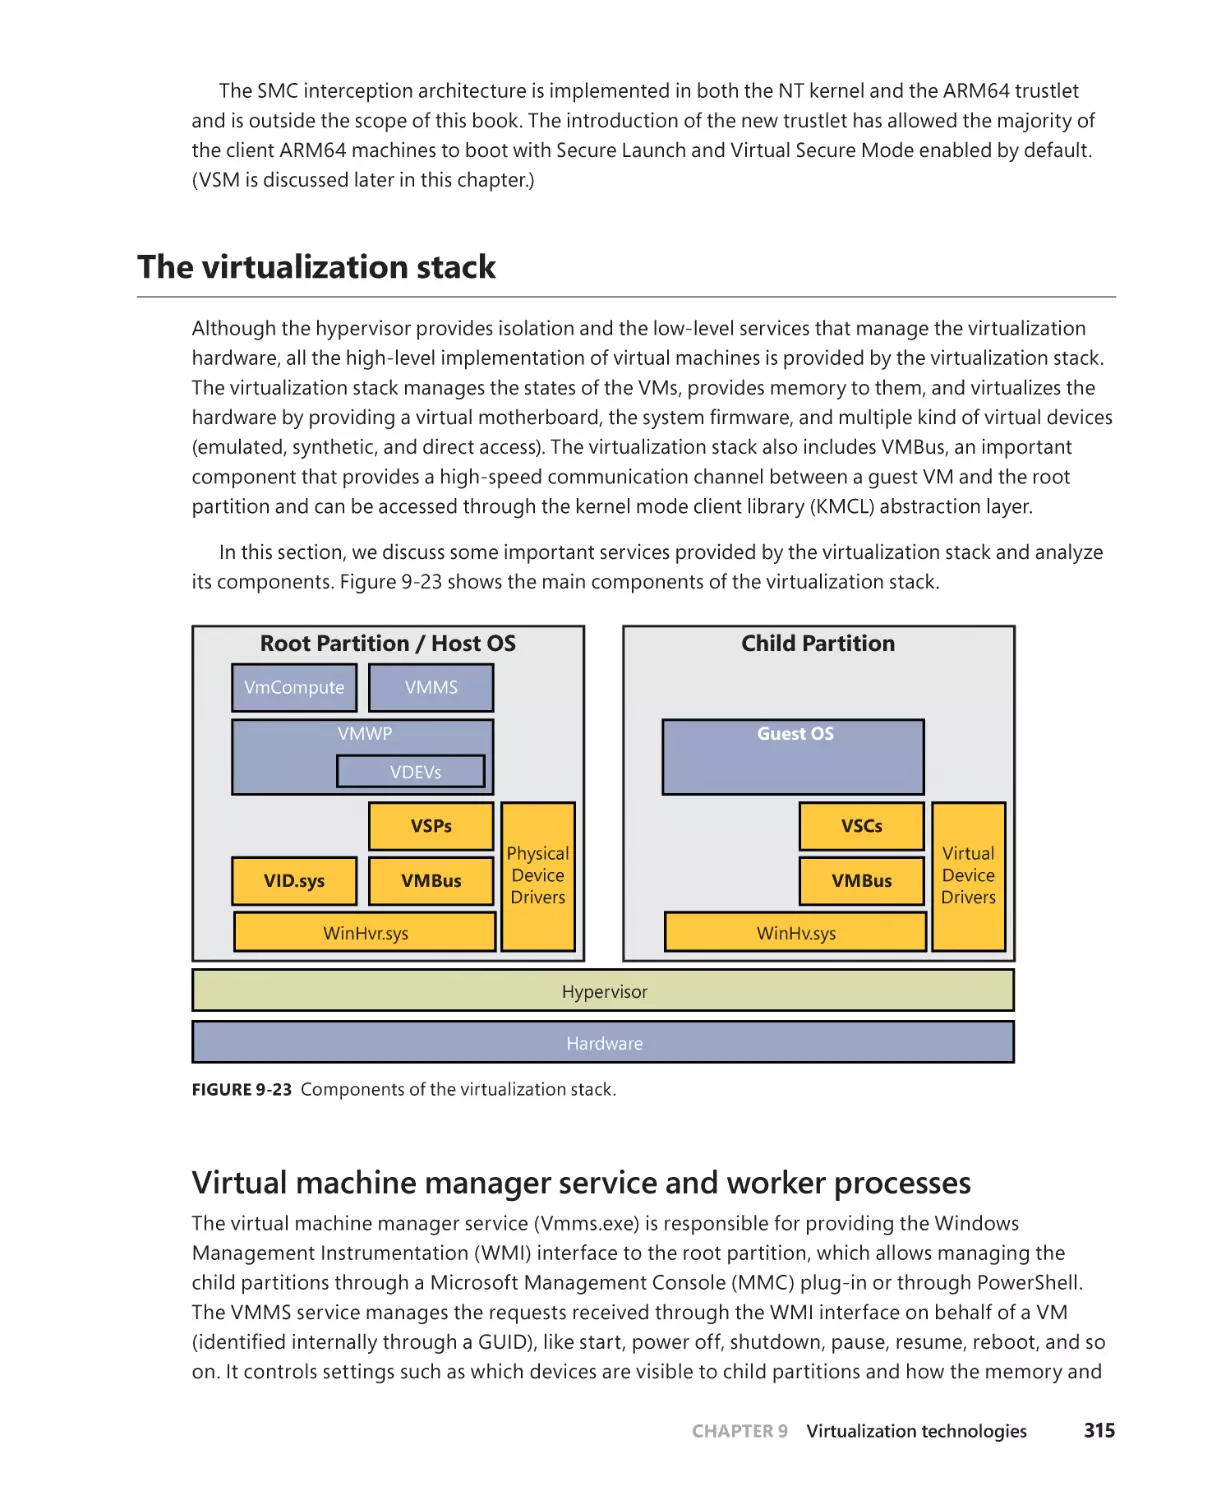 The virtualization stack
Virtual machine manager service and worker processes